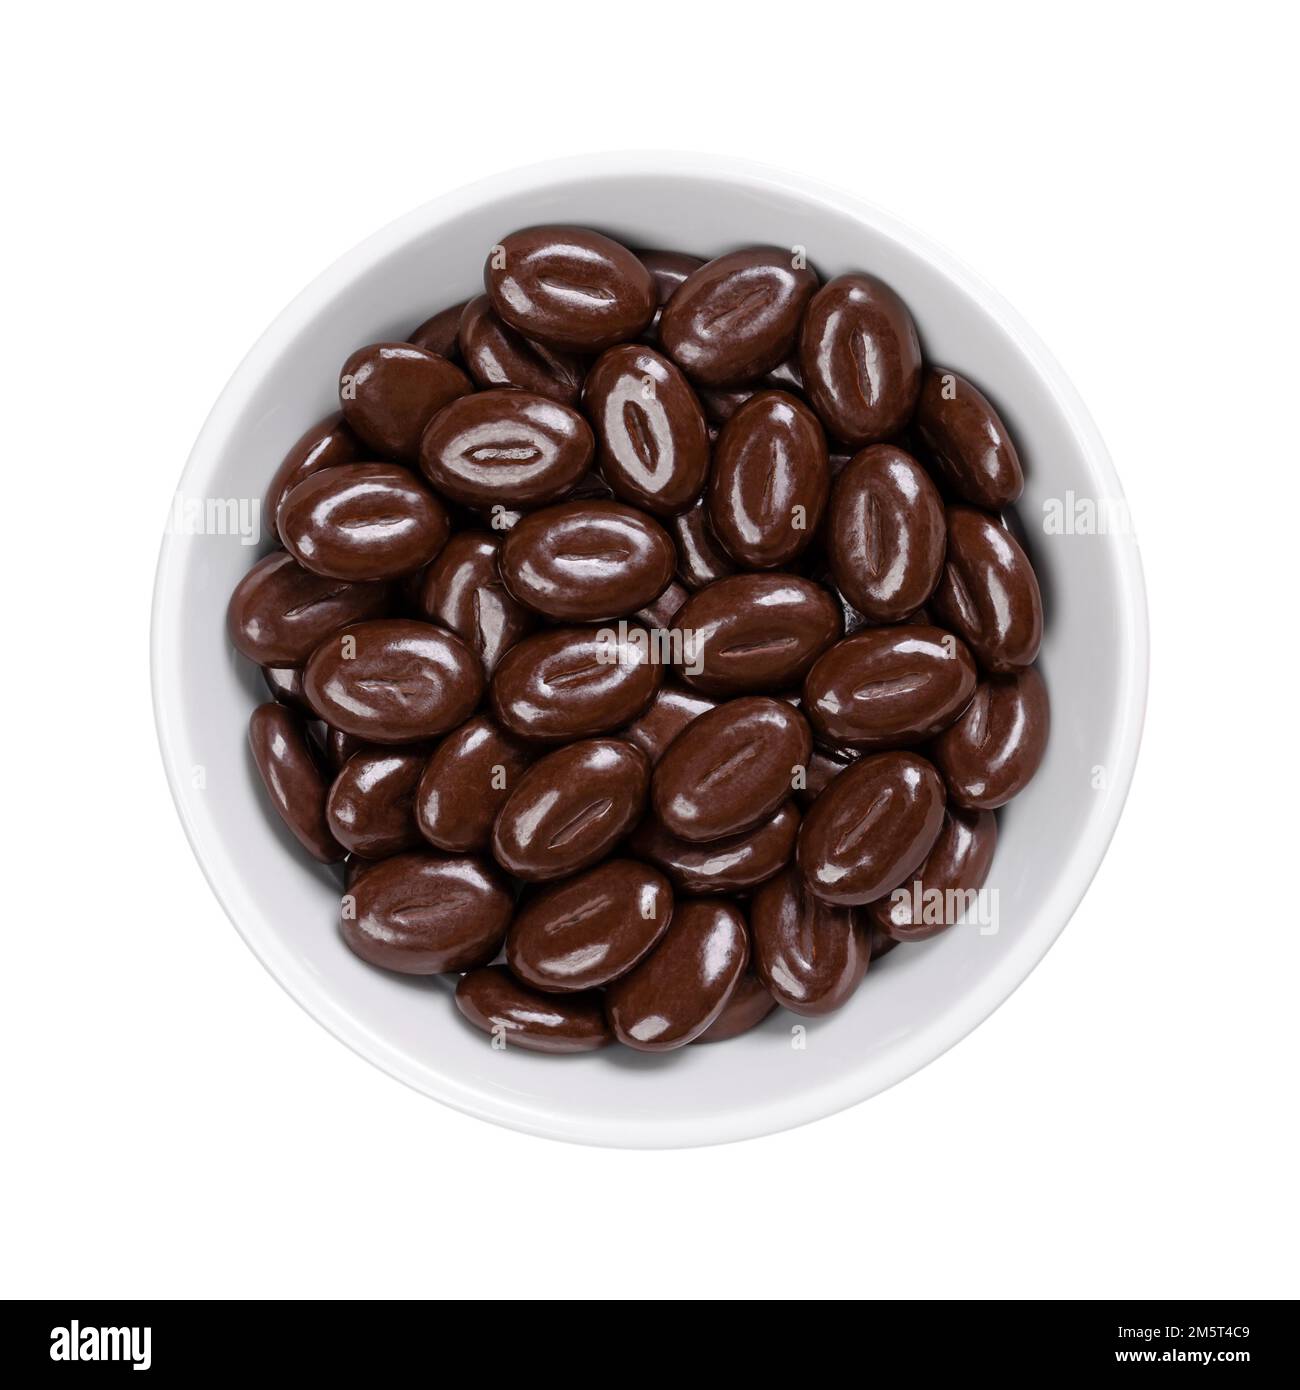 Dark chocolate mocha beans, in a white bowl. Candies made of a mixture of coffee bean flavor with indulgent dark chocolate, coffee bean shaped. Stock Photo